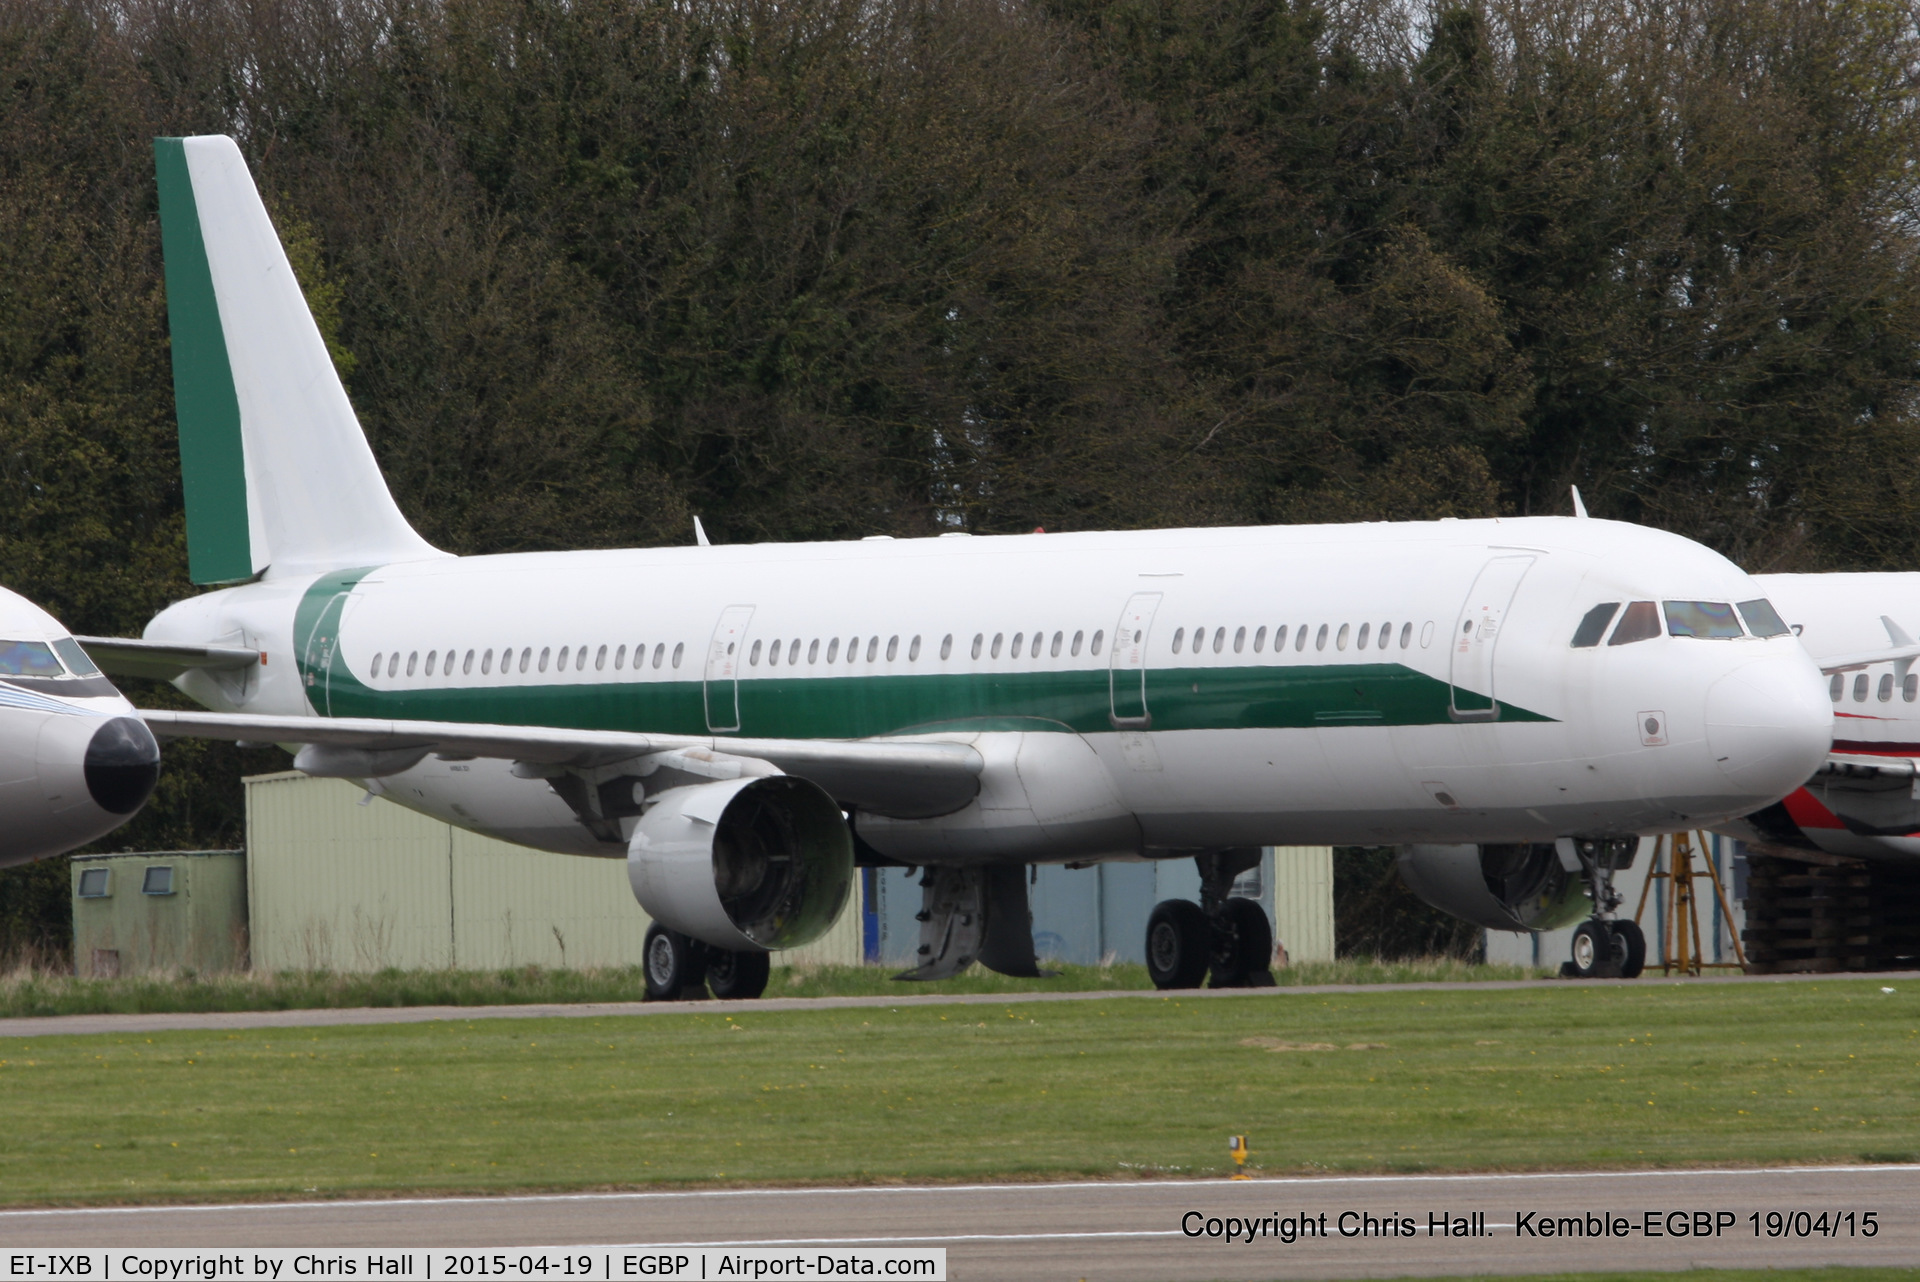 EI-IXB, 1995 Airbus A321-112 C/N 524, ex Alitalia, in the scrapping area at Kemble